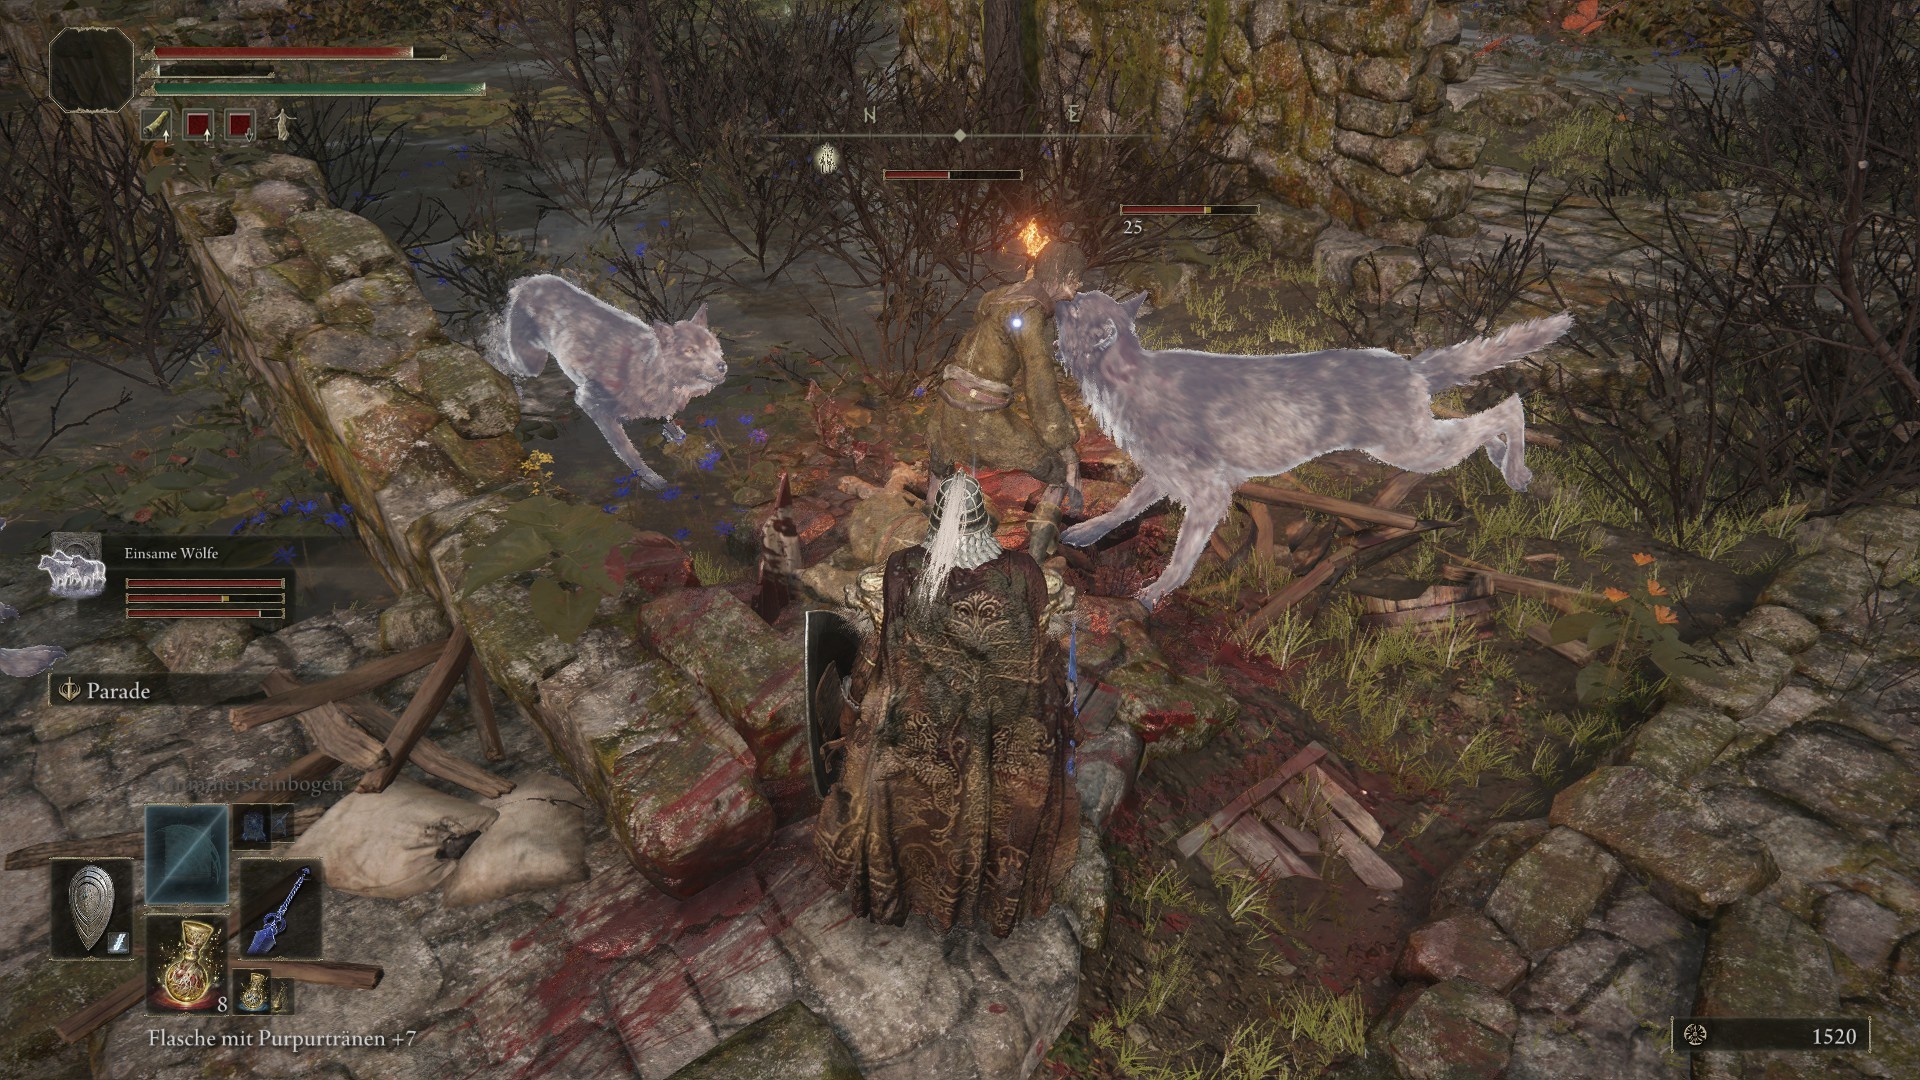 Ghost companions like these wolves here make short work of weaker opponents. In boss fights, they're more of a distraction, giving you a brief respite.